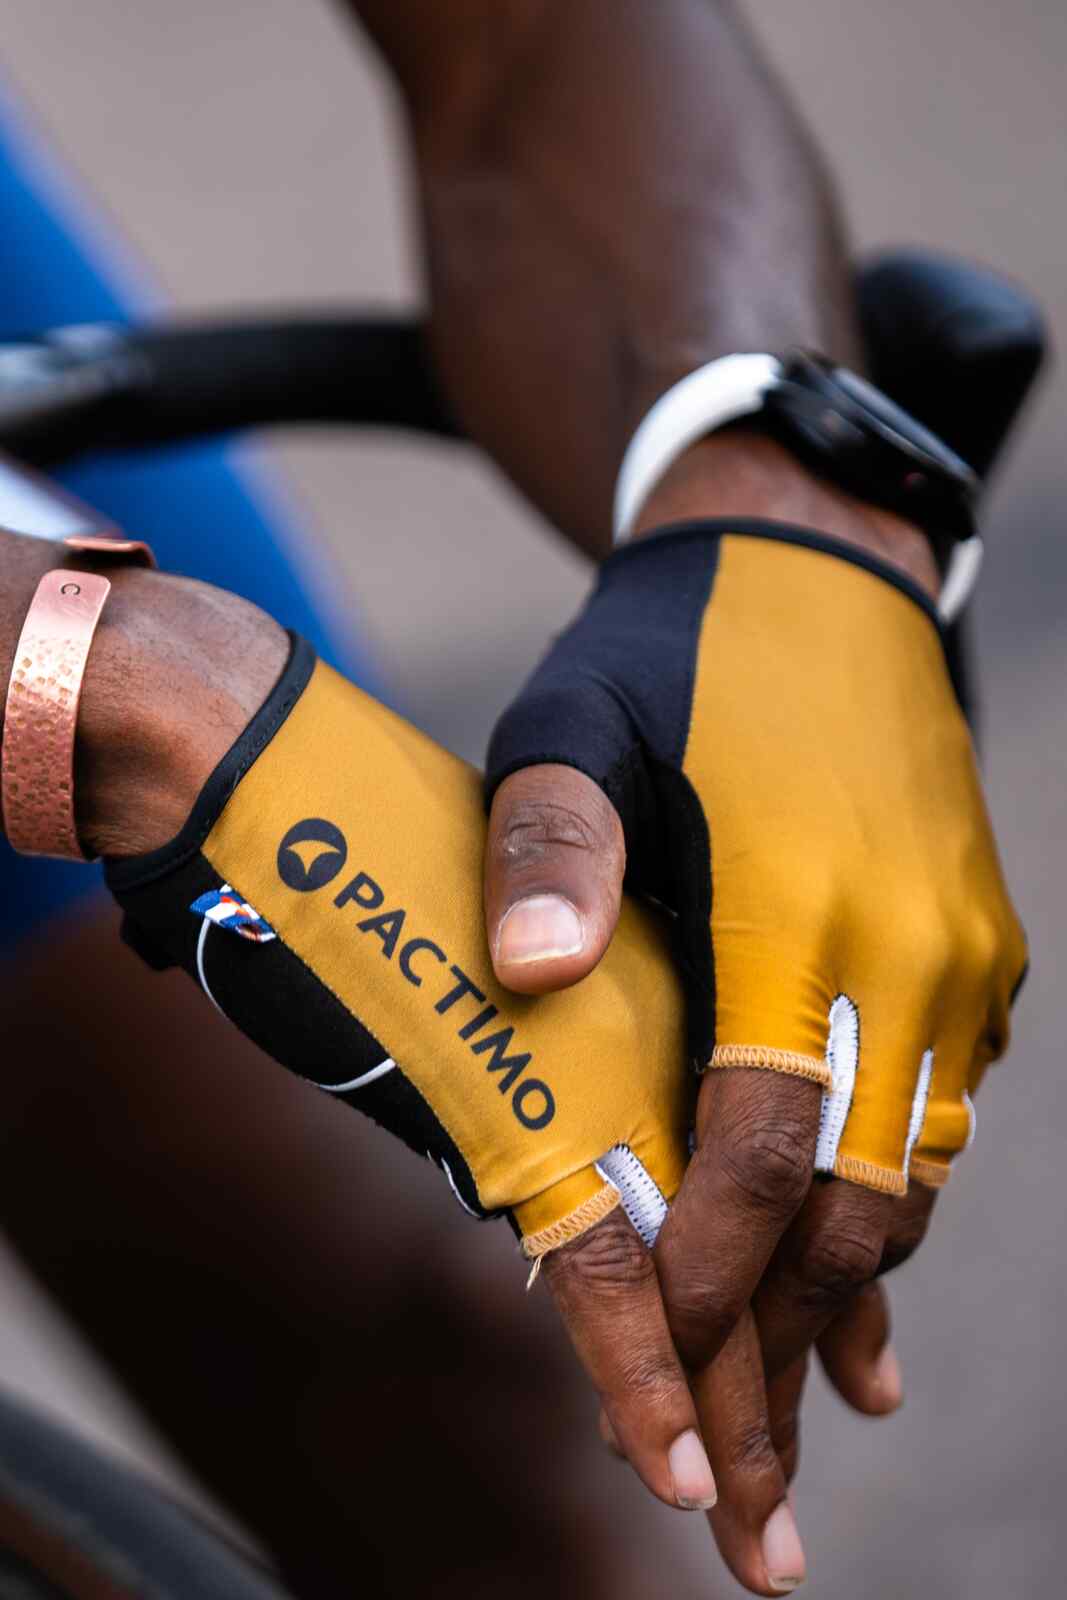 Golden Yellow Cycling Gloves on Cyclist